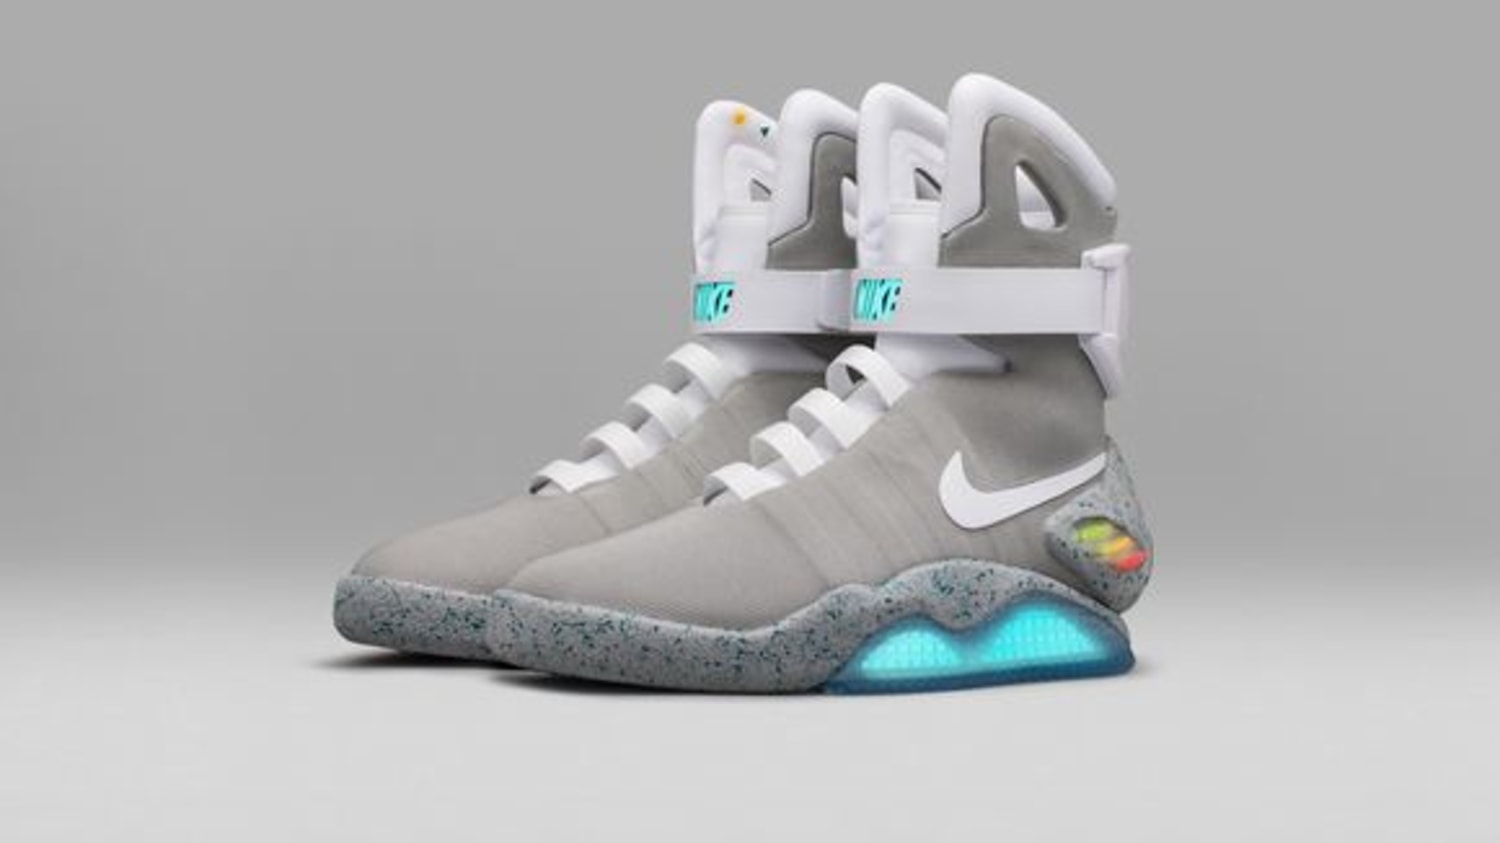 Nike 'Back to the Future' Self-Tying Shoes